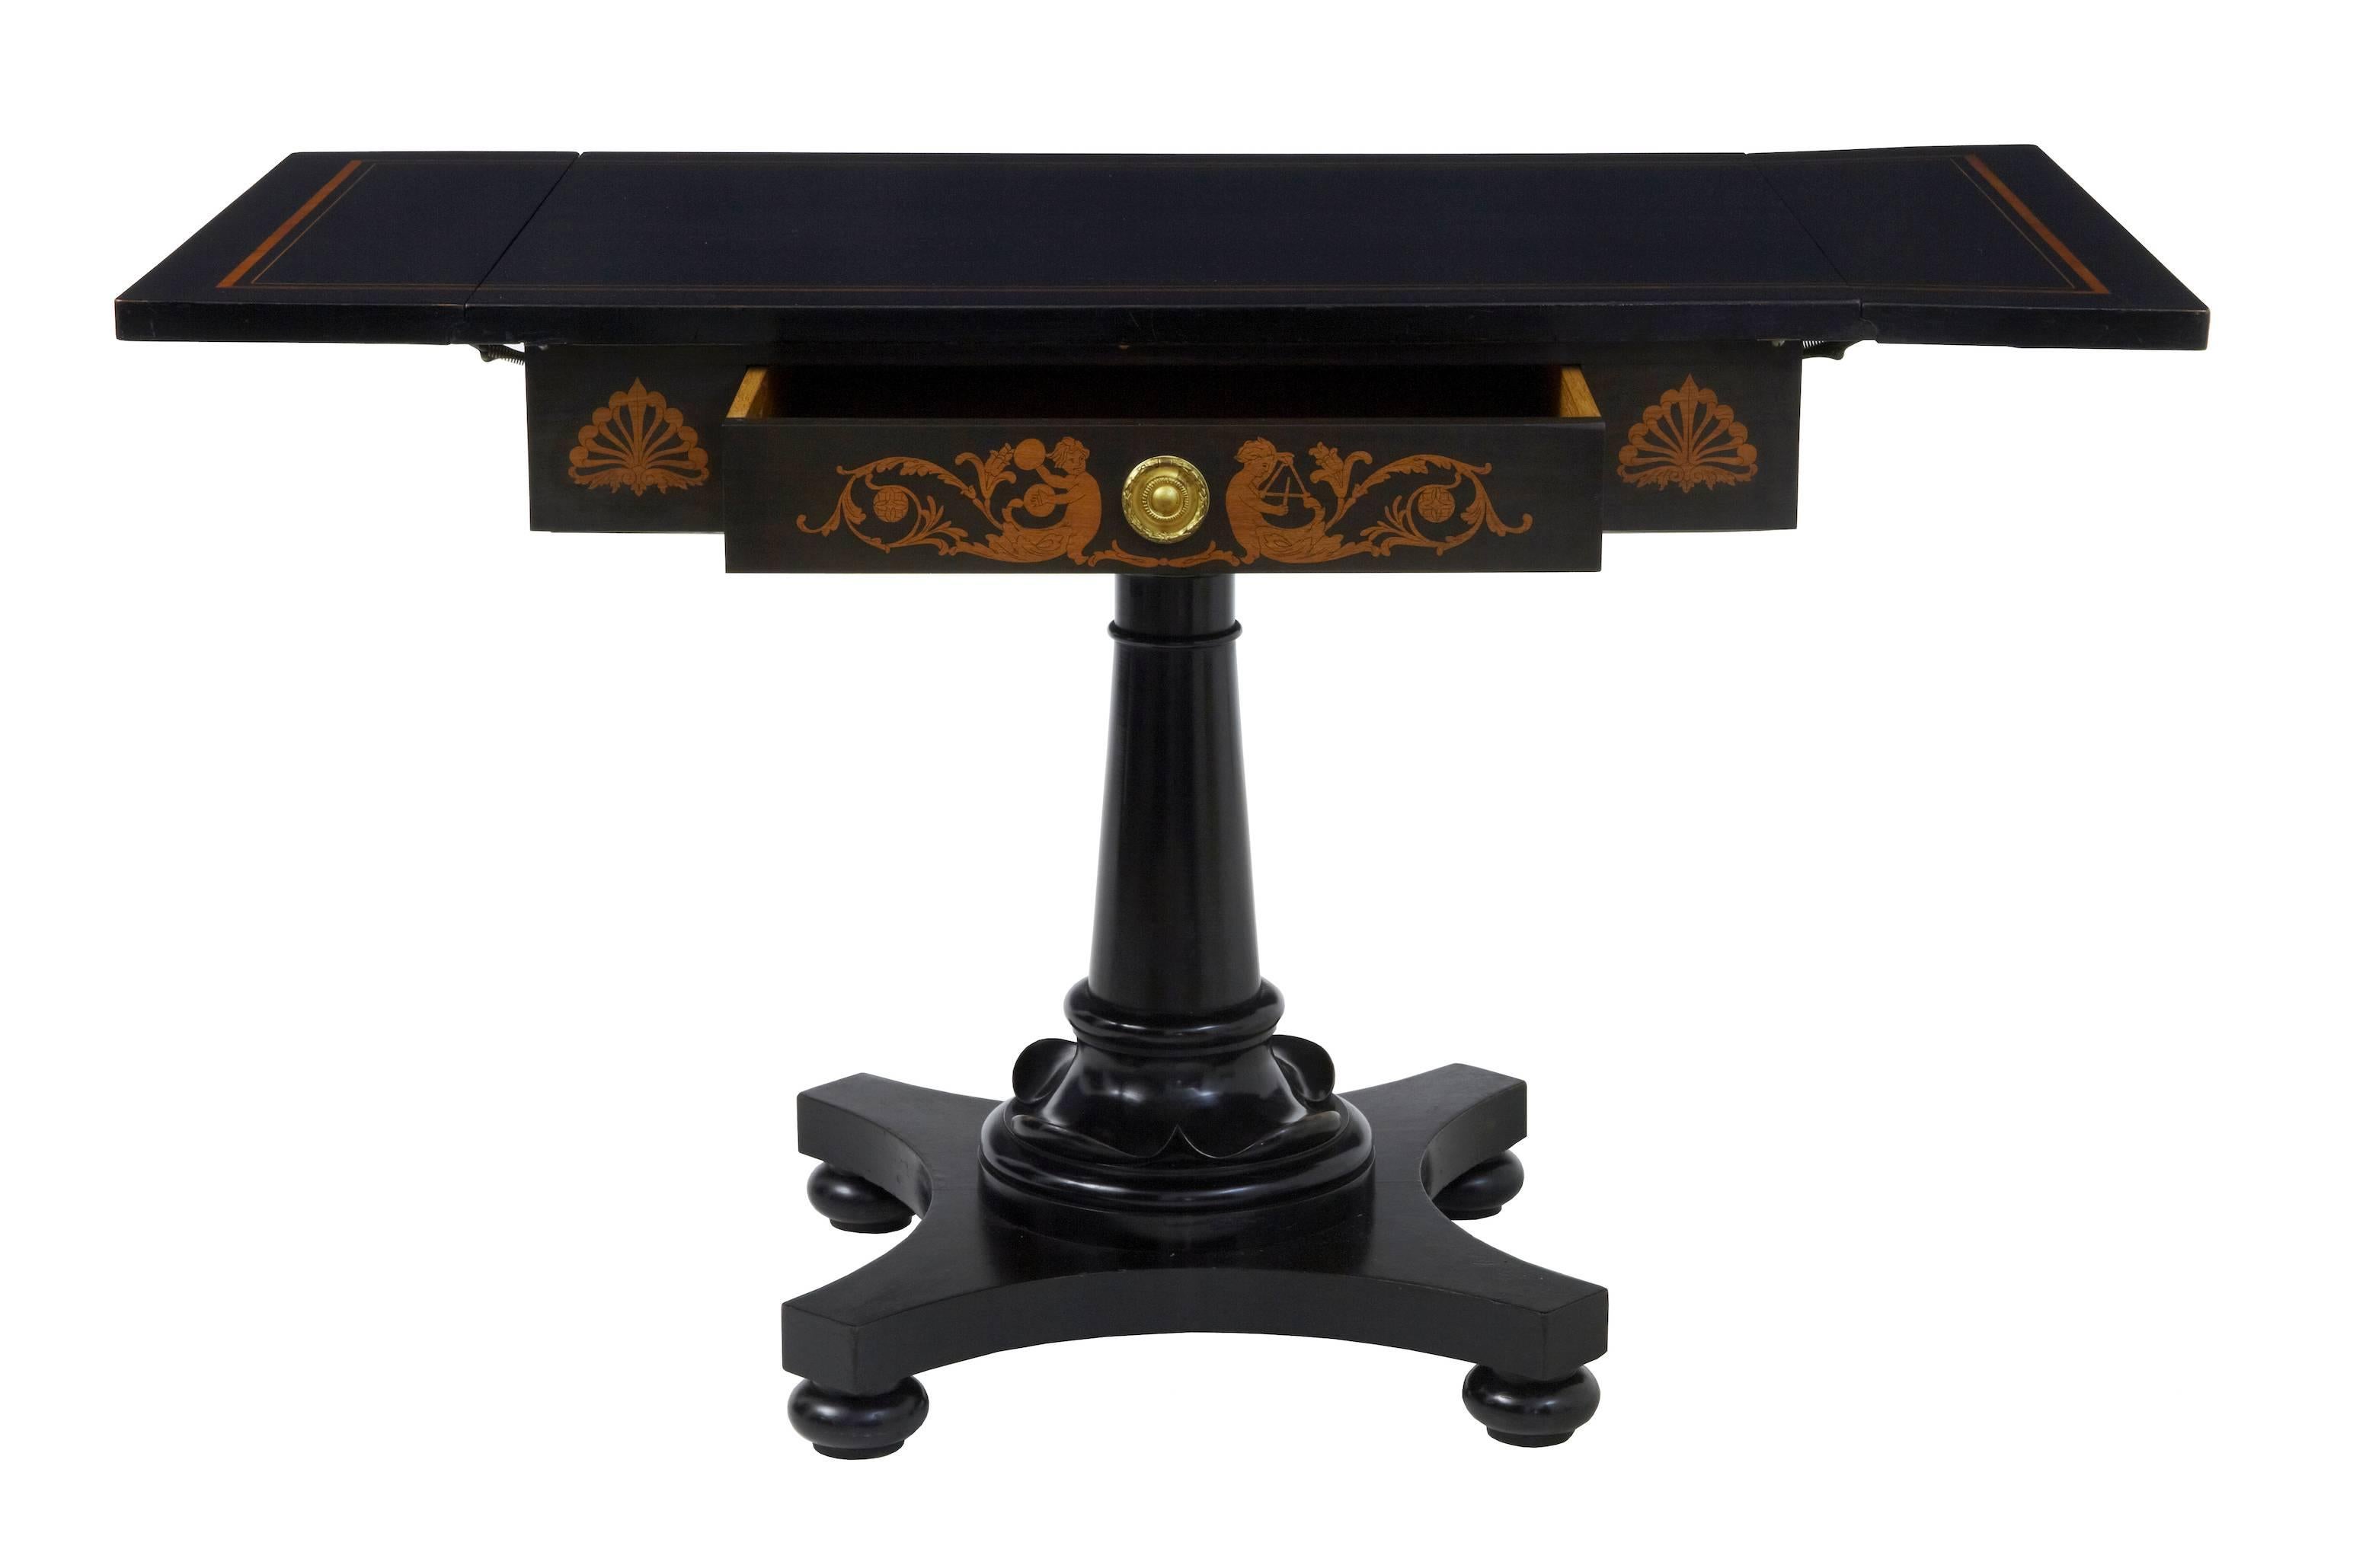 Swedish ebonized table, circa 1890.
Drop-leaf sofa table with inlaid top and drawer.
Single drawer to front.
Some minor rubbing to ebonised finish.

Measures: Height 29 1/2